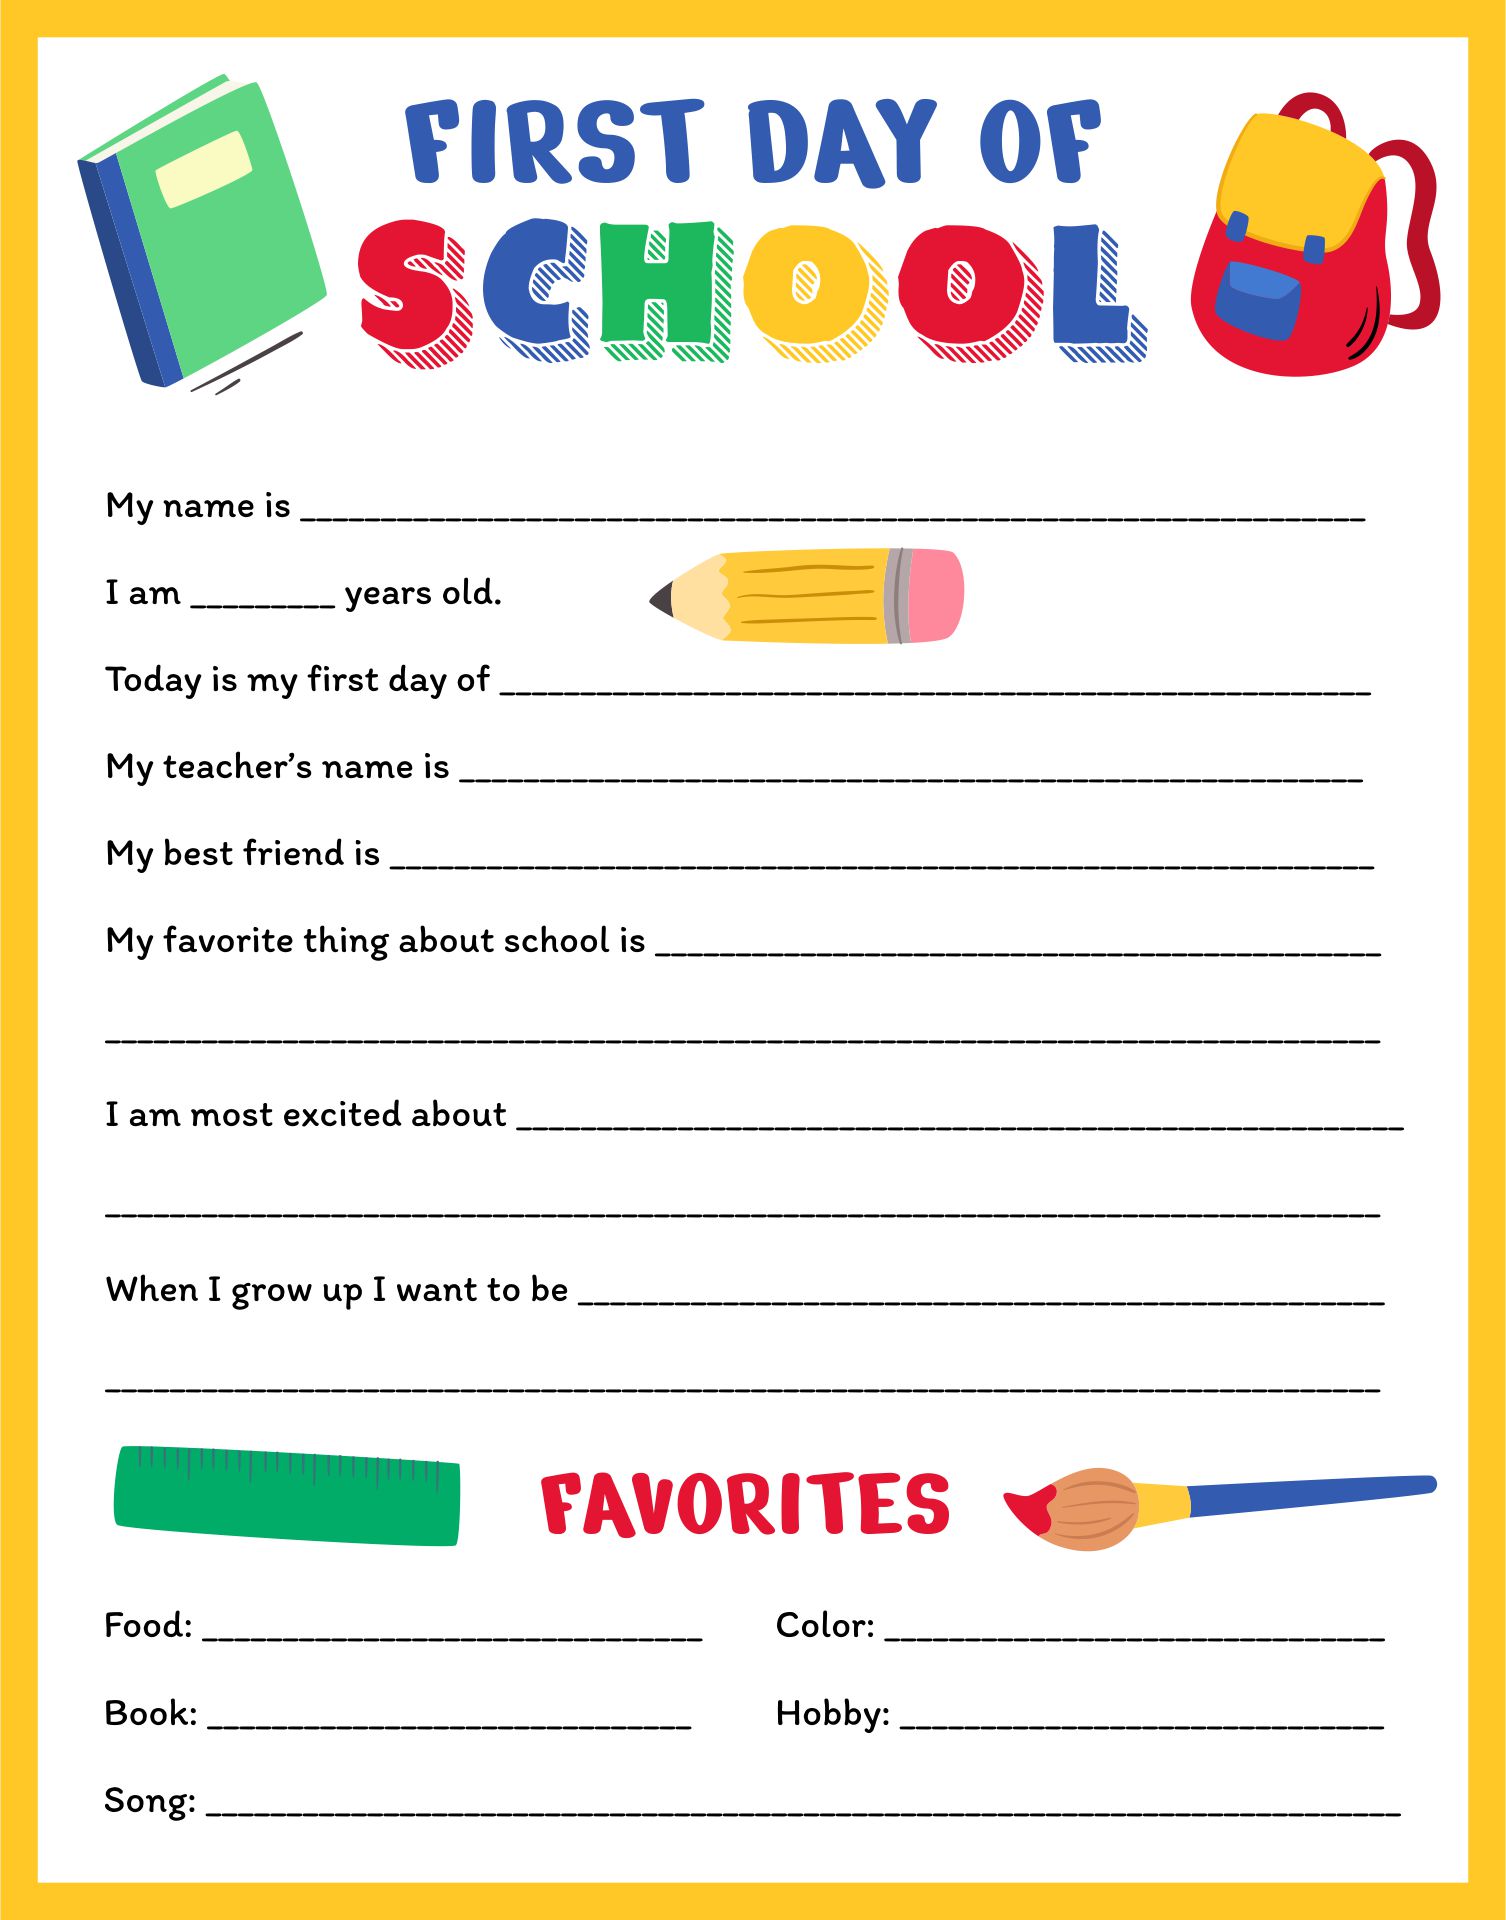 First Day of School Printable Worksheets